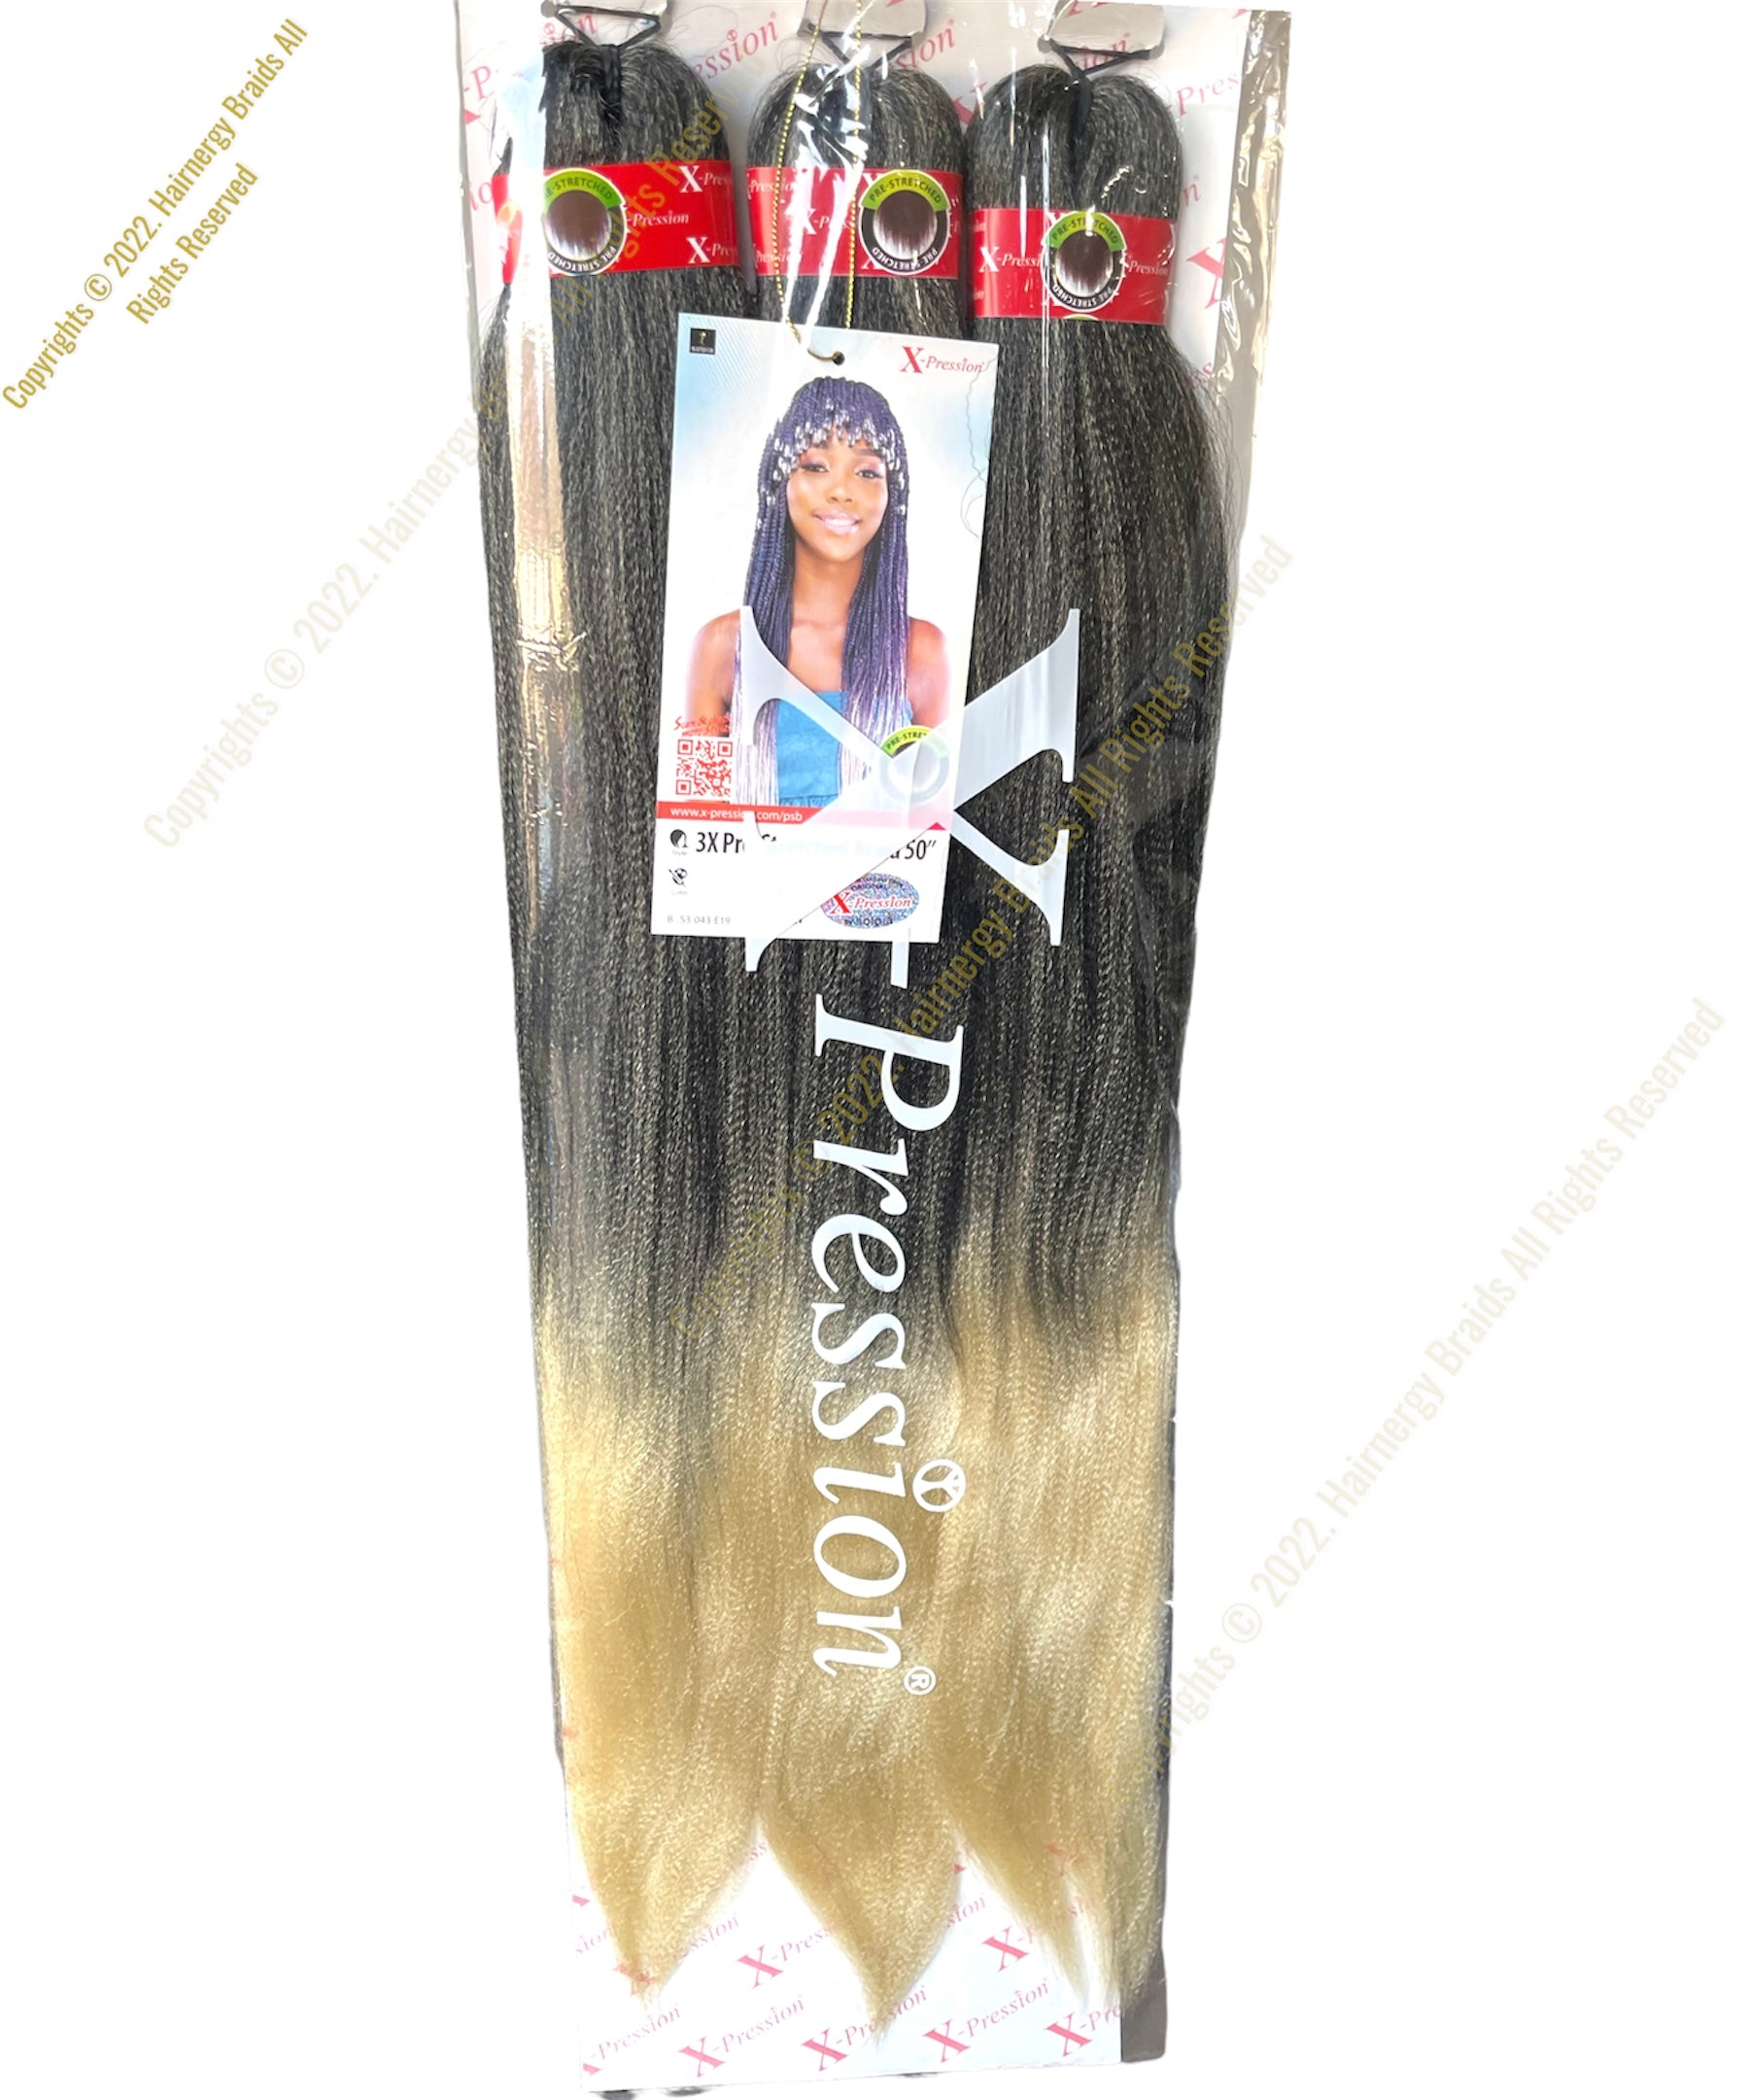 X-Pression Pre-stretched Hair Braiding Extensions 50 Color 1/30 ombre –  Hairnergy Braids